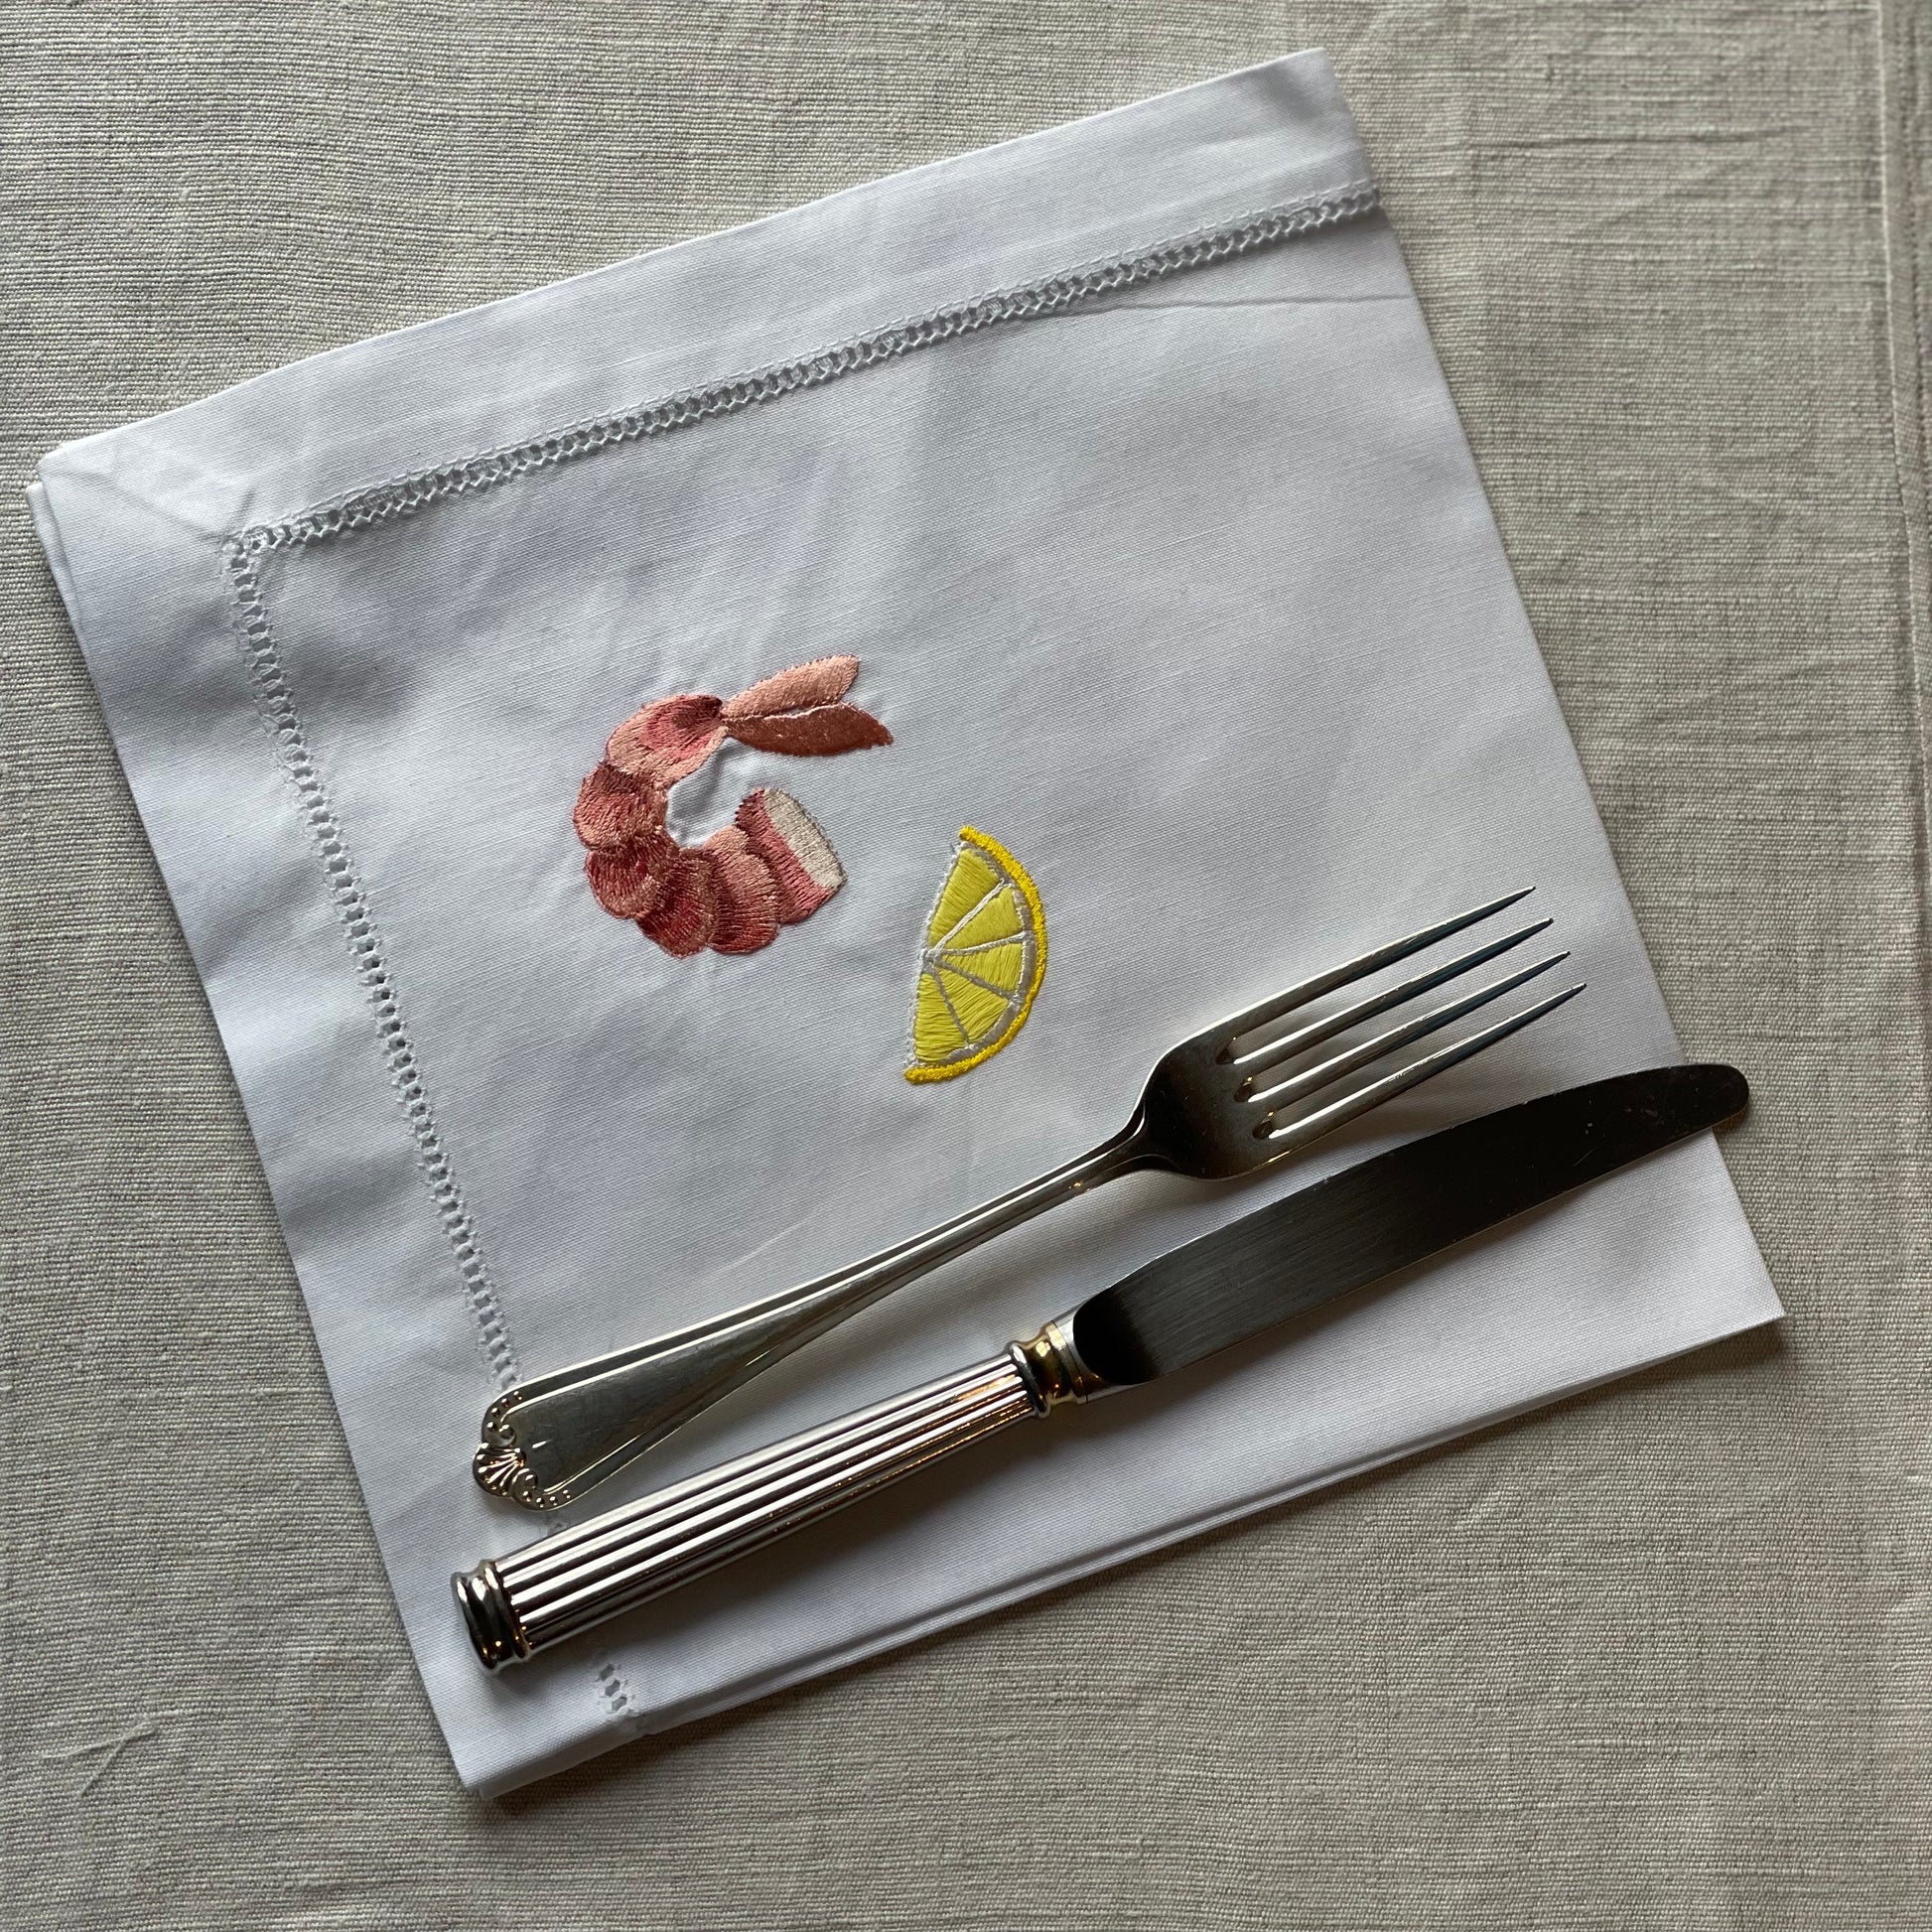 White napkin with embroidered prawn and lemon on and a metal knife and fork laid on top